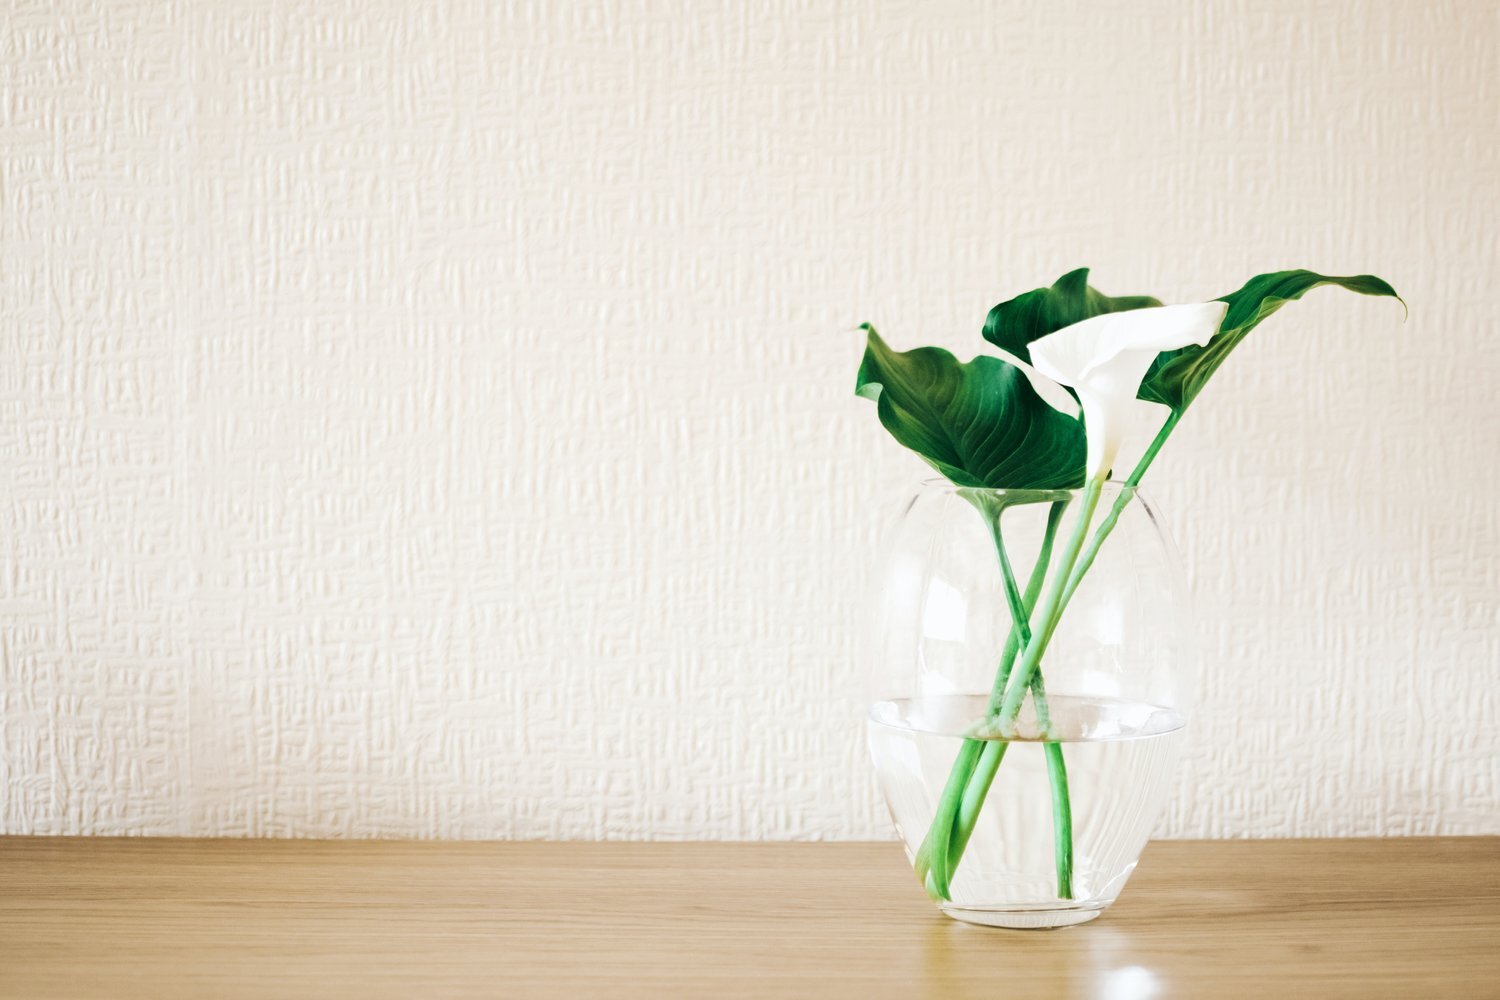 A vase sits in front of textured wallpaper